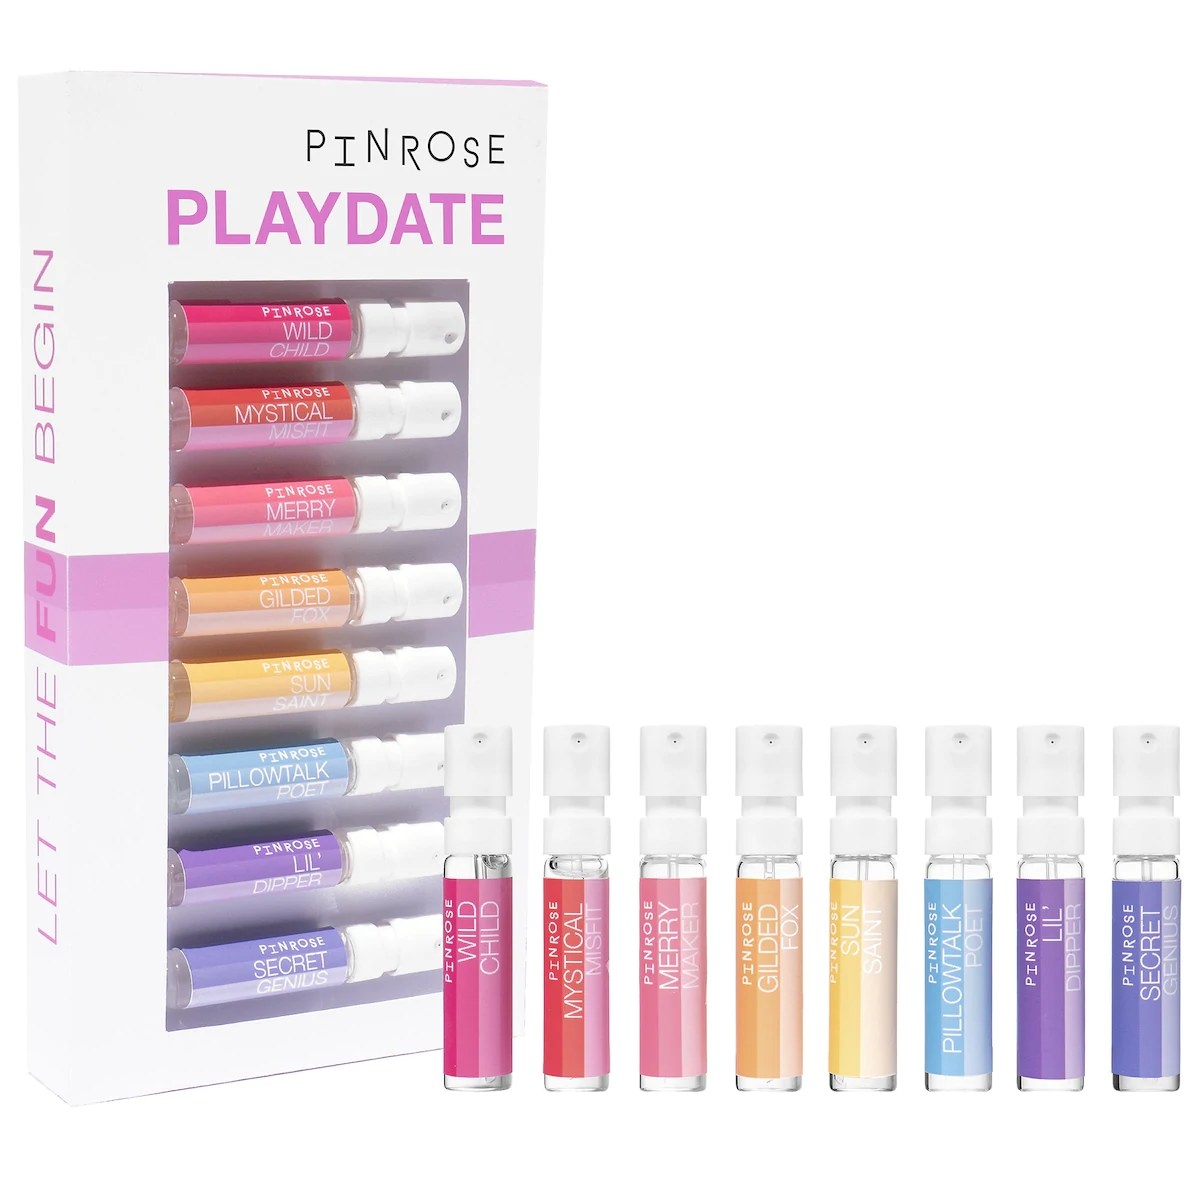 The perfume discovery set with eight colorful vials 